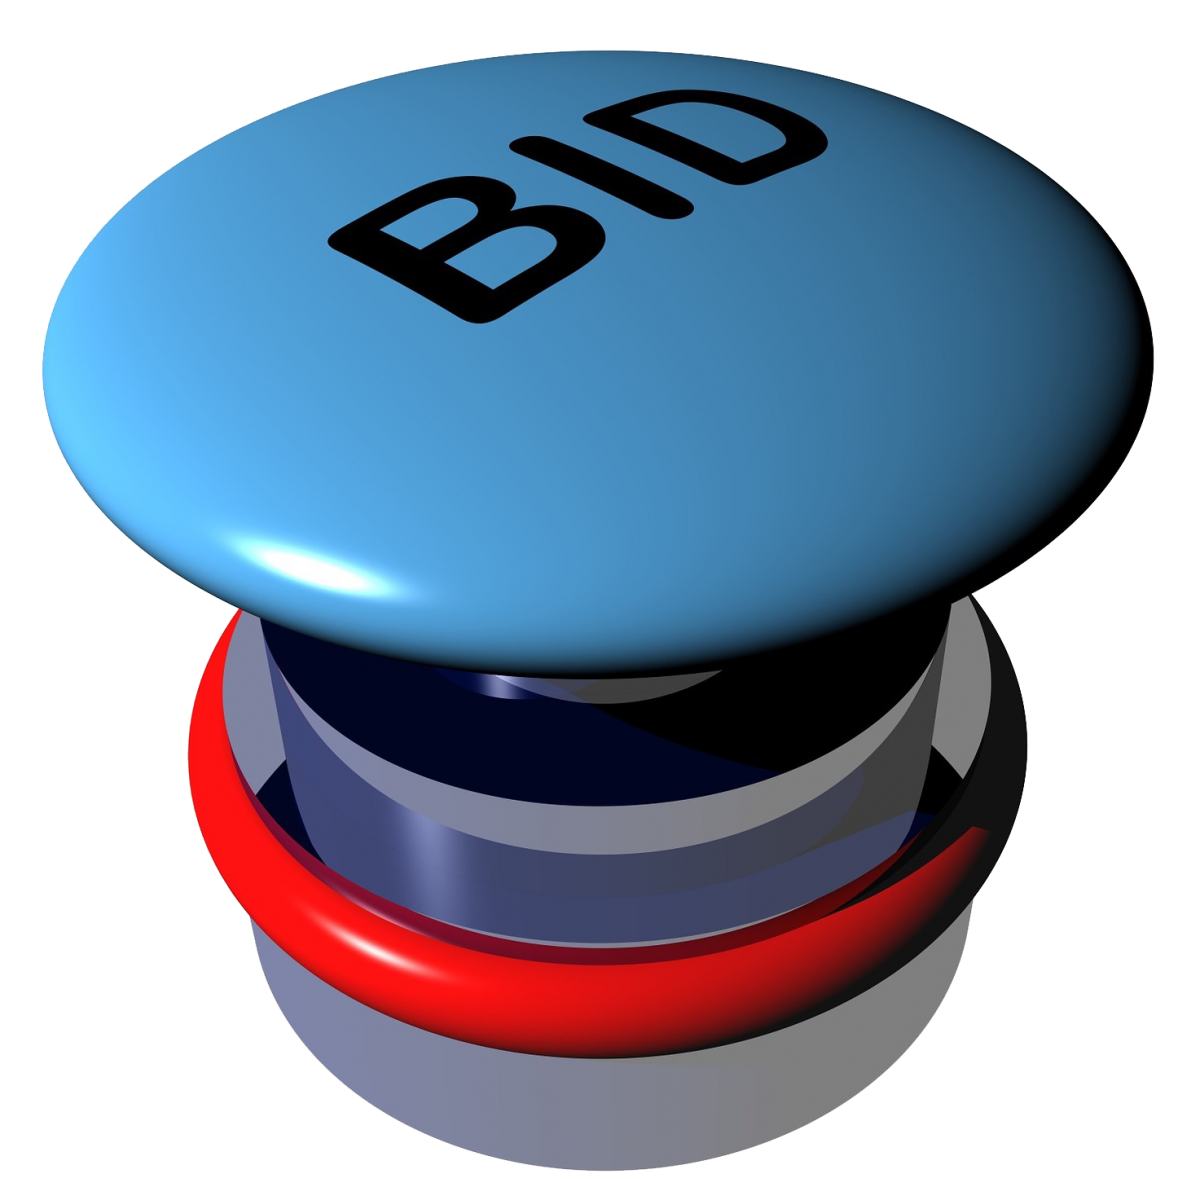 online bidding is easy once you know the key terms.